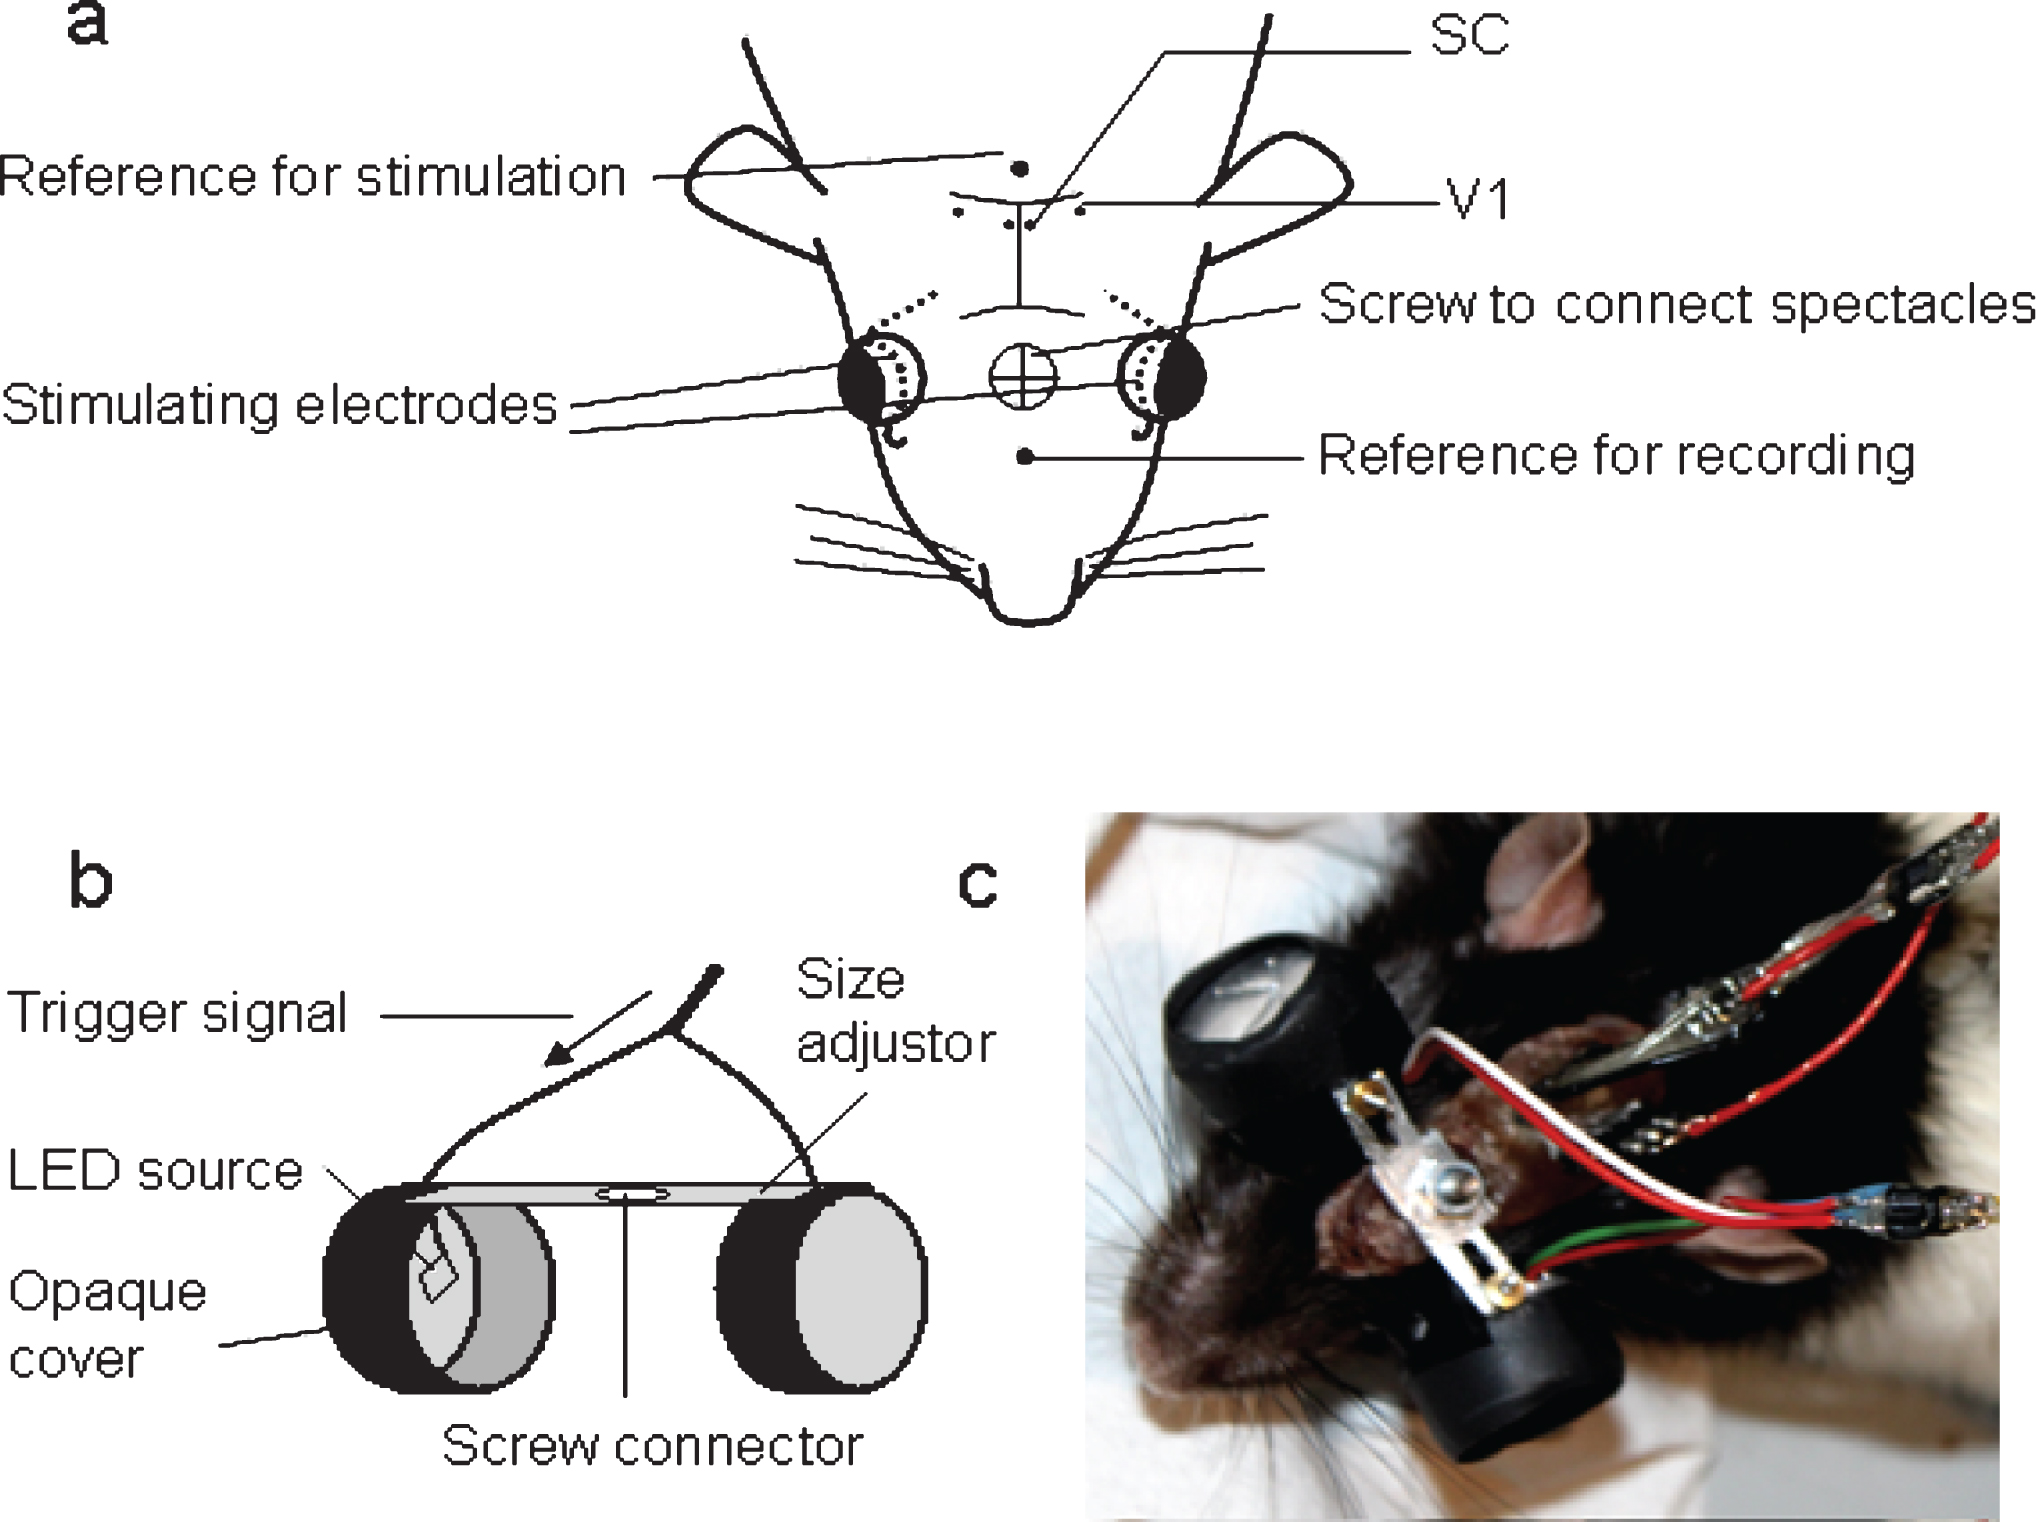 Experimental setup for recording of local field potentials and transcorneal current stimulation in freely moving rats. (a) Implantation scheme: the rats have electrodes implanted into the primary visual cortex (V1) and superior colliculus (SC); the reference electrode for recording was implanted into the nose bone; fine wires for current stimulation were inserted under the upper eye lids and passed through under the skin to the skull surface; the reference electrode for stimulation was implanted into occipital bone. (b) Spectacles construct. (c) a rat with connected preamplifier, stimulation conductor and embedded spectacles.